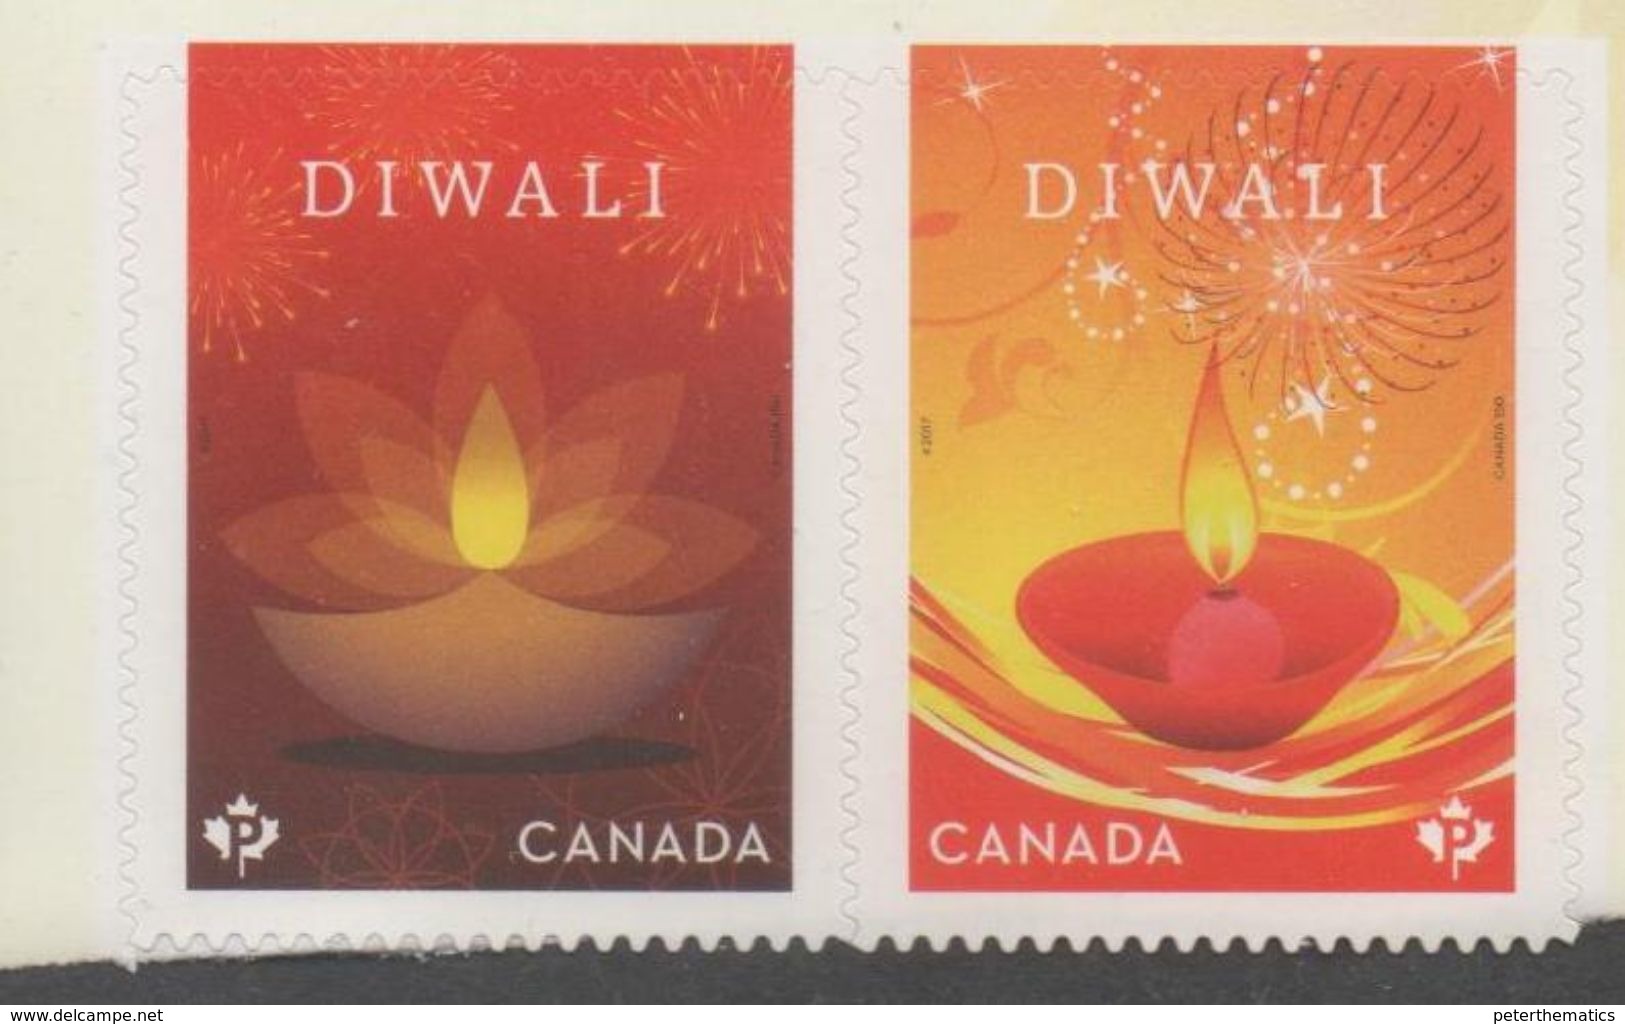 CANADA, 2017, MNH, JOINT ISSUE WITH INDIA, DIWALI, CELEBRATIONS, 2v Ex. BOOKLET - Joint Issues